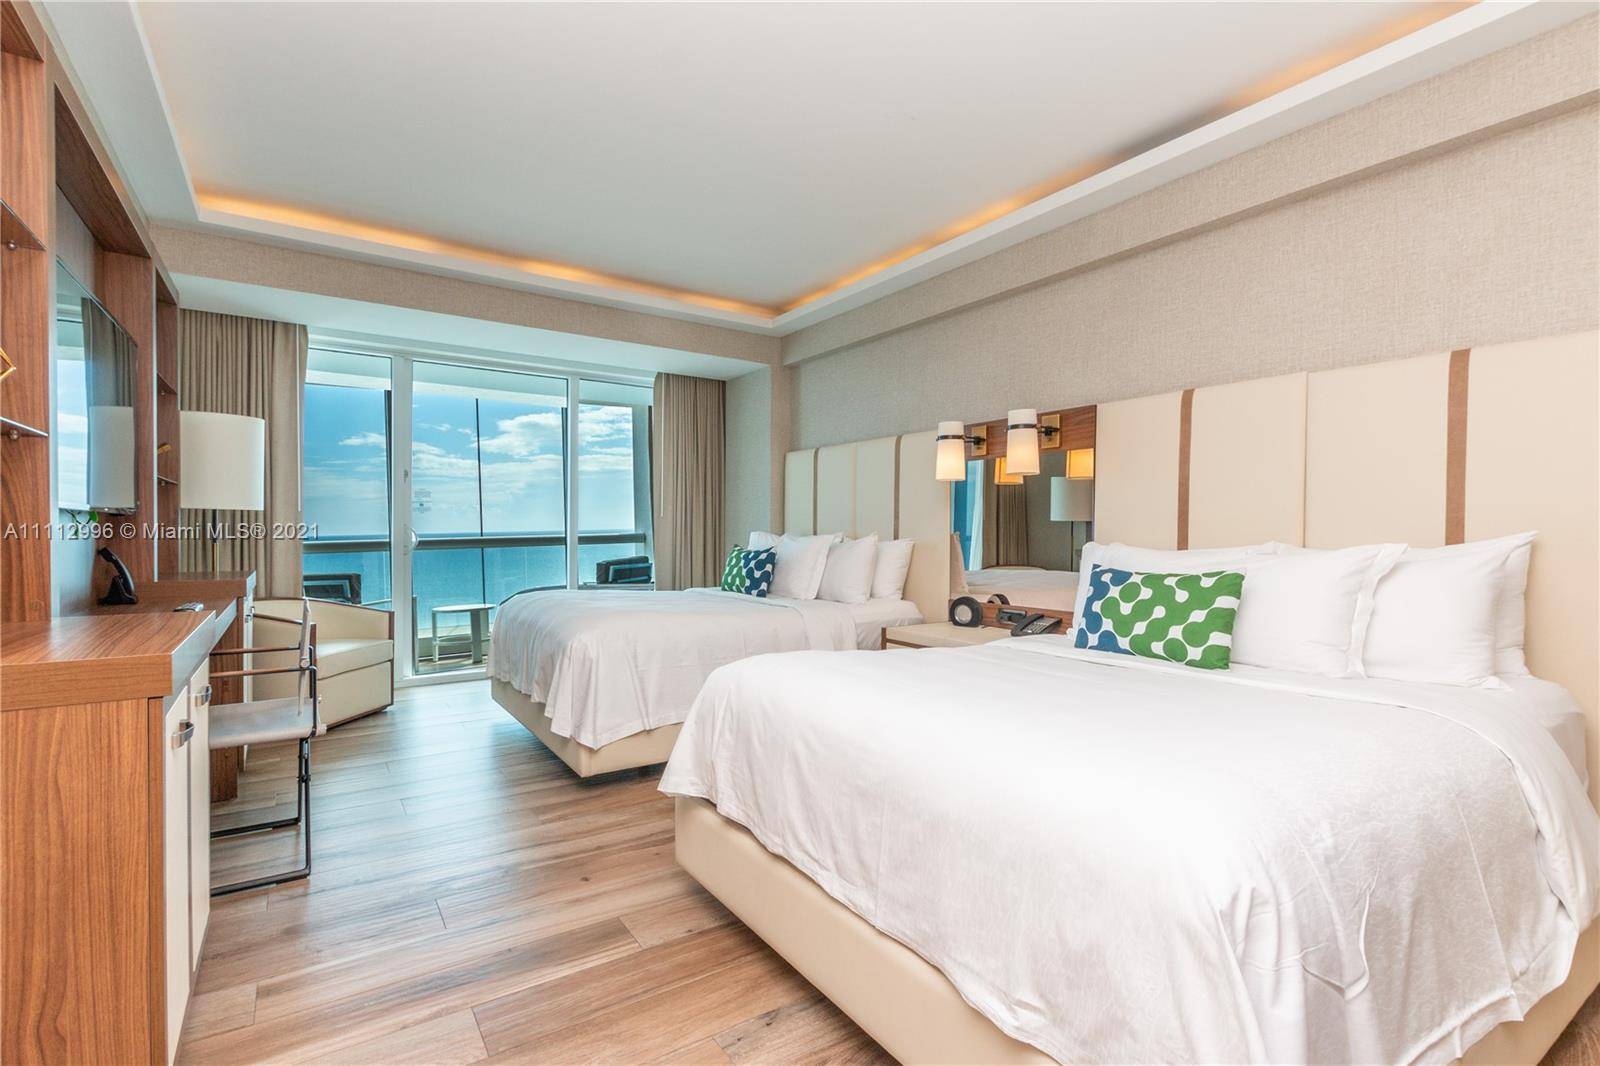 DIRECT OCEANVIEW ! Amazing opportunity to own a turn key Studio 1.